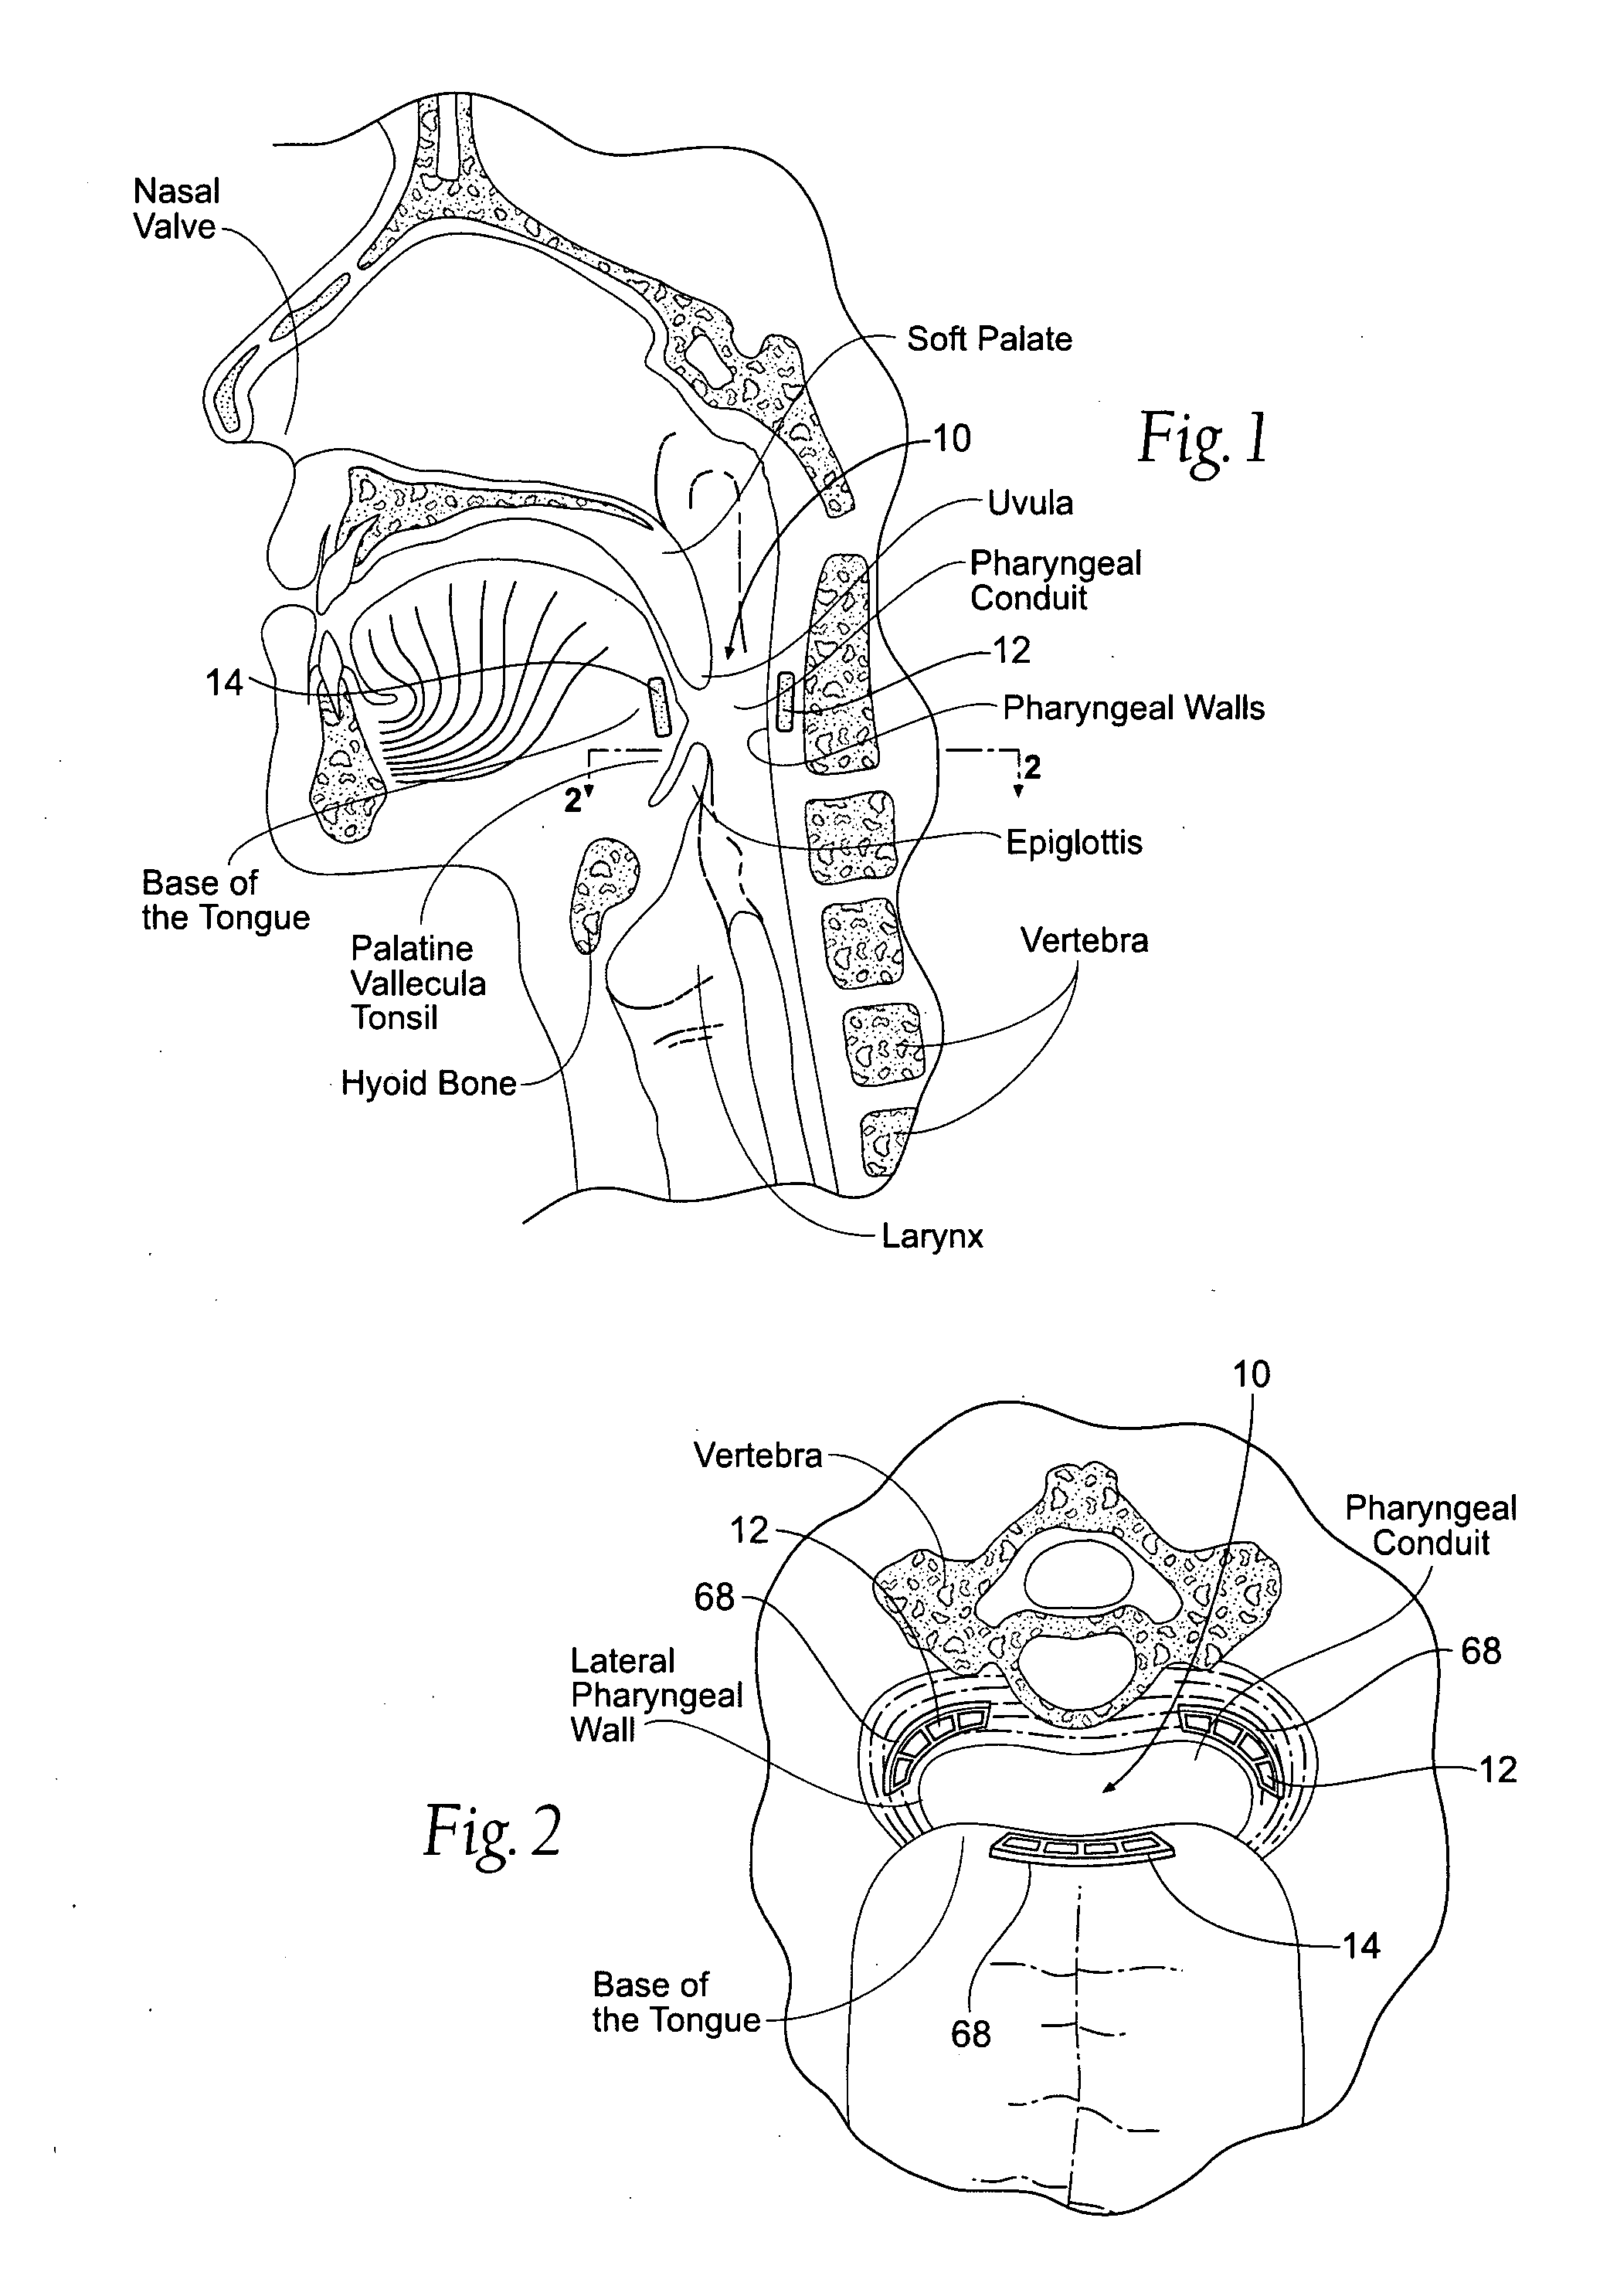 Devices, systems, and methods to fixate tissue within the regions of the body, such as the pharyngeal conduit